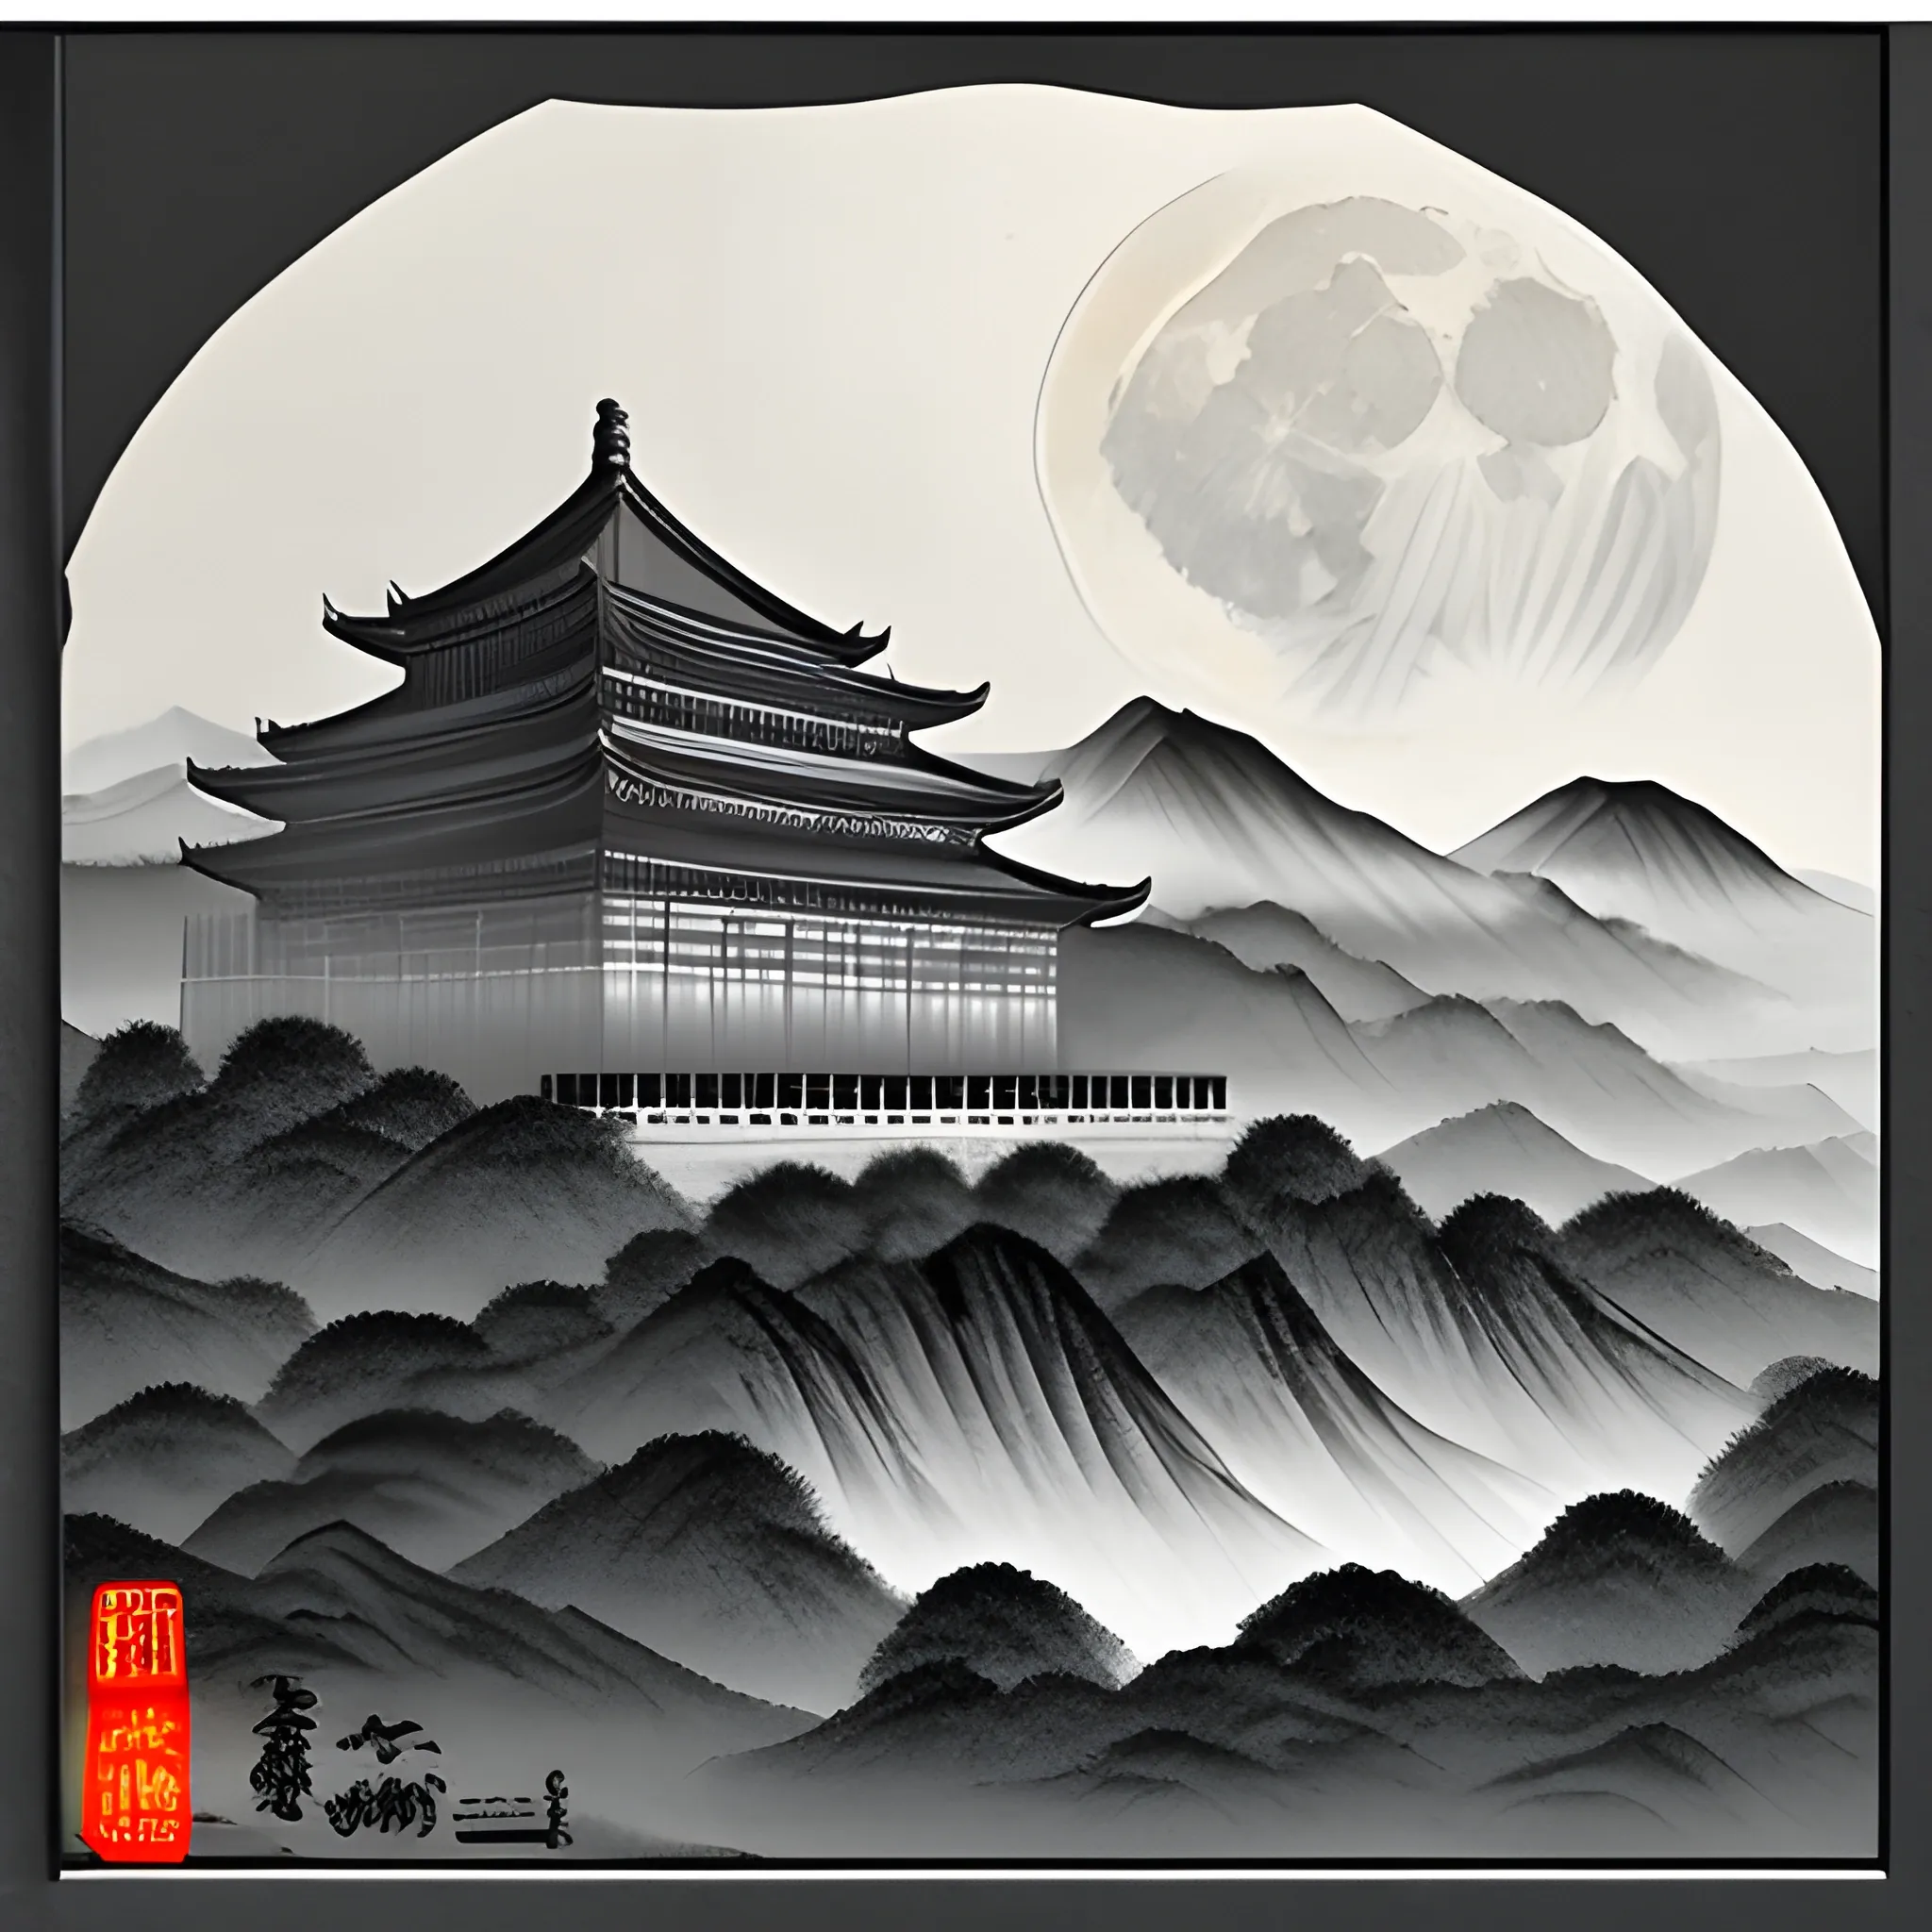 Produce a Shuǐ mò huà (Chinese ink wash painting) depicting lonly of mist-covered mountains, with the largest moon visible on the right side of the composition. Additionally, include a tiny temple situated atop one of the mountains for added detail and depth.